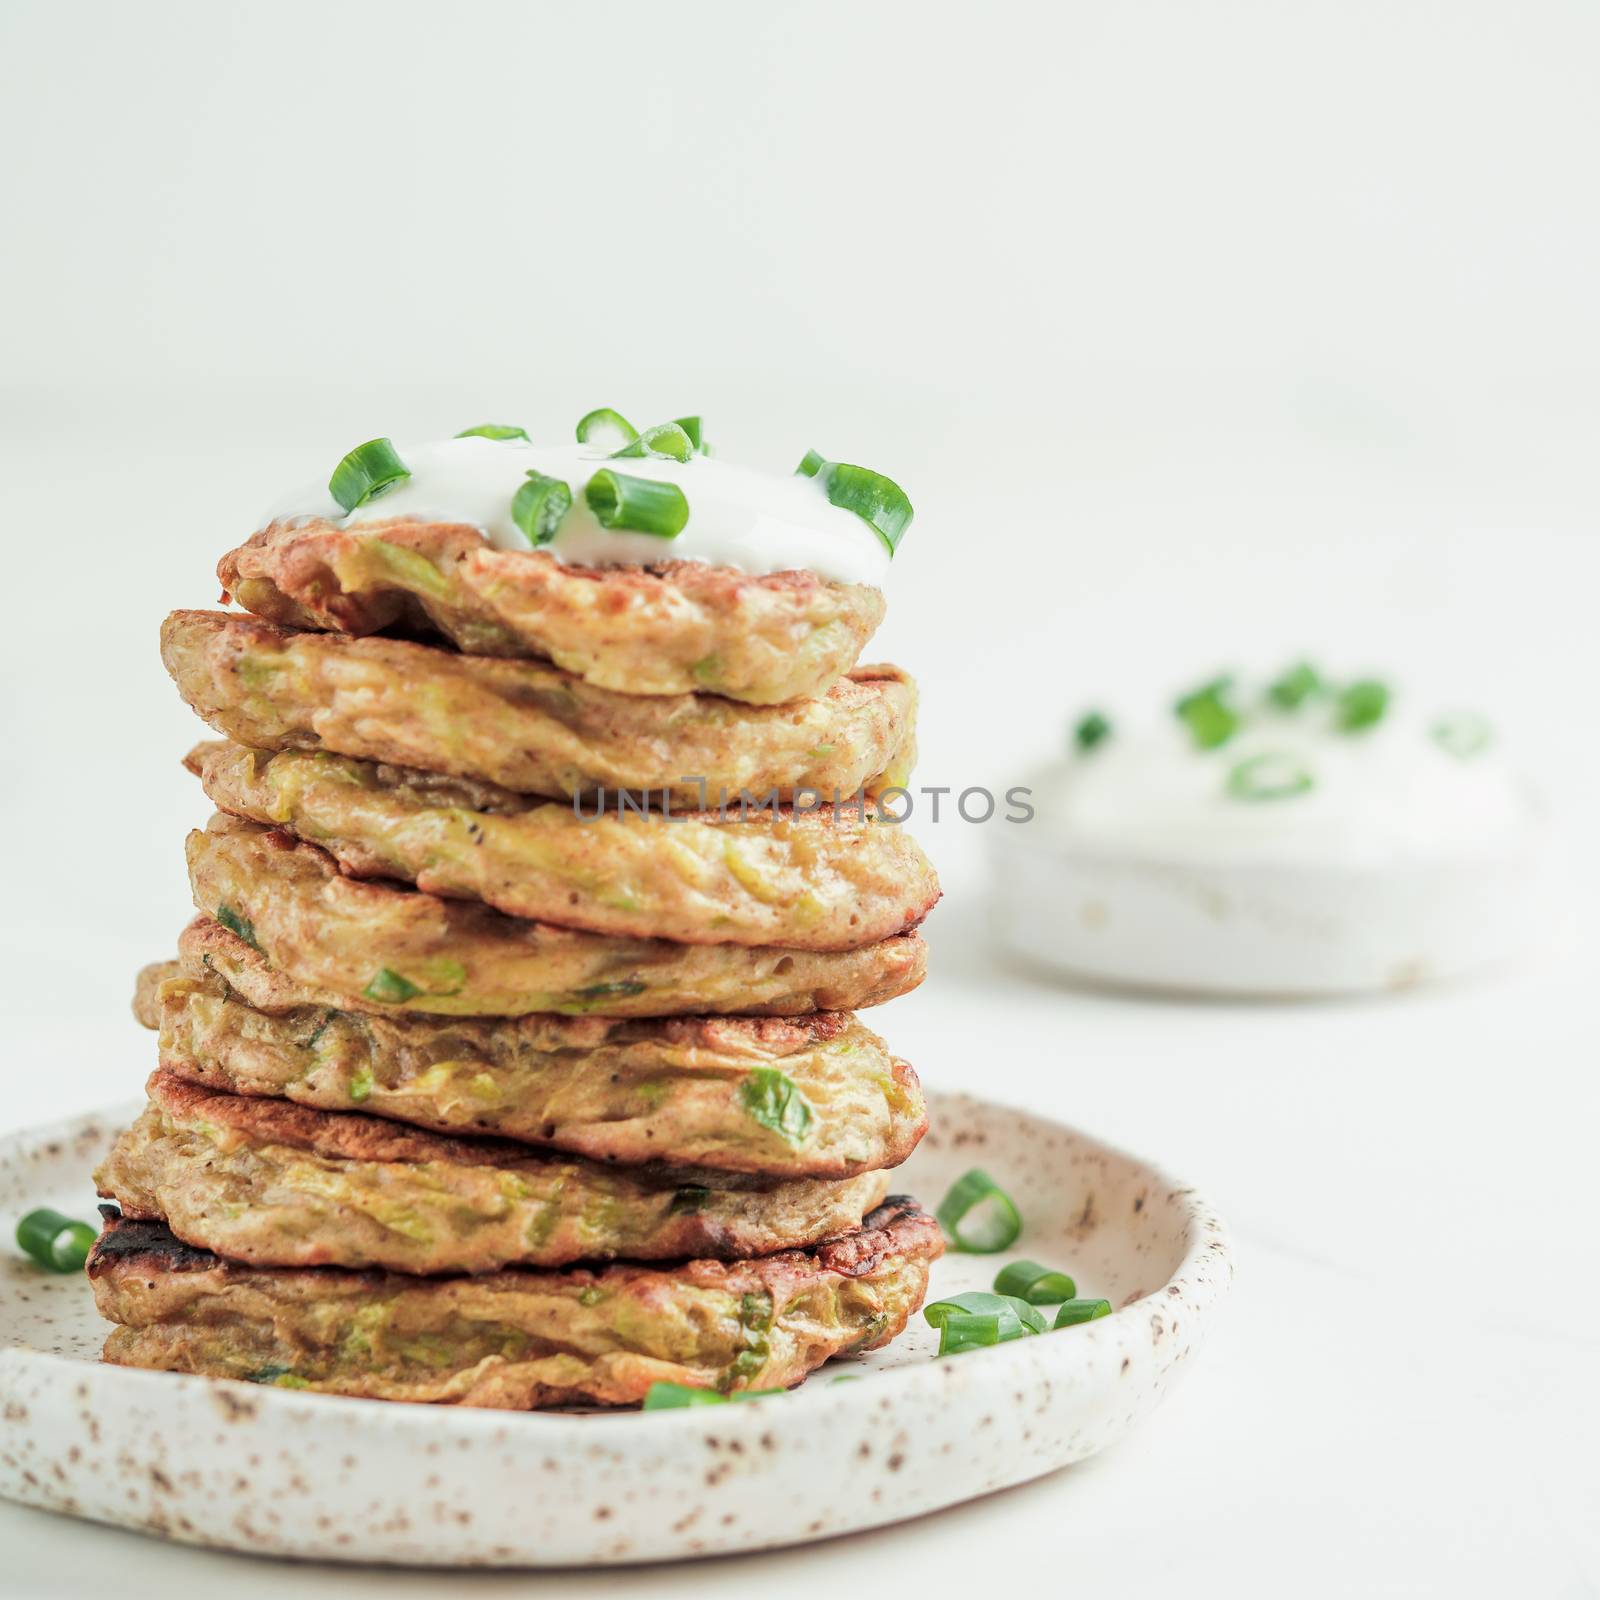 Zucchini fritters. Traditional zucchini fritters in stack on white background. Zucchini pancakes or fritters with green onion and parmesan cheese,served sour cream or greek yogurt. Copy space for text